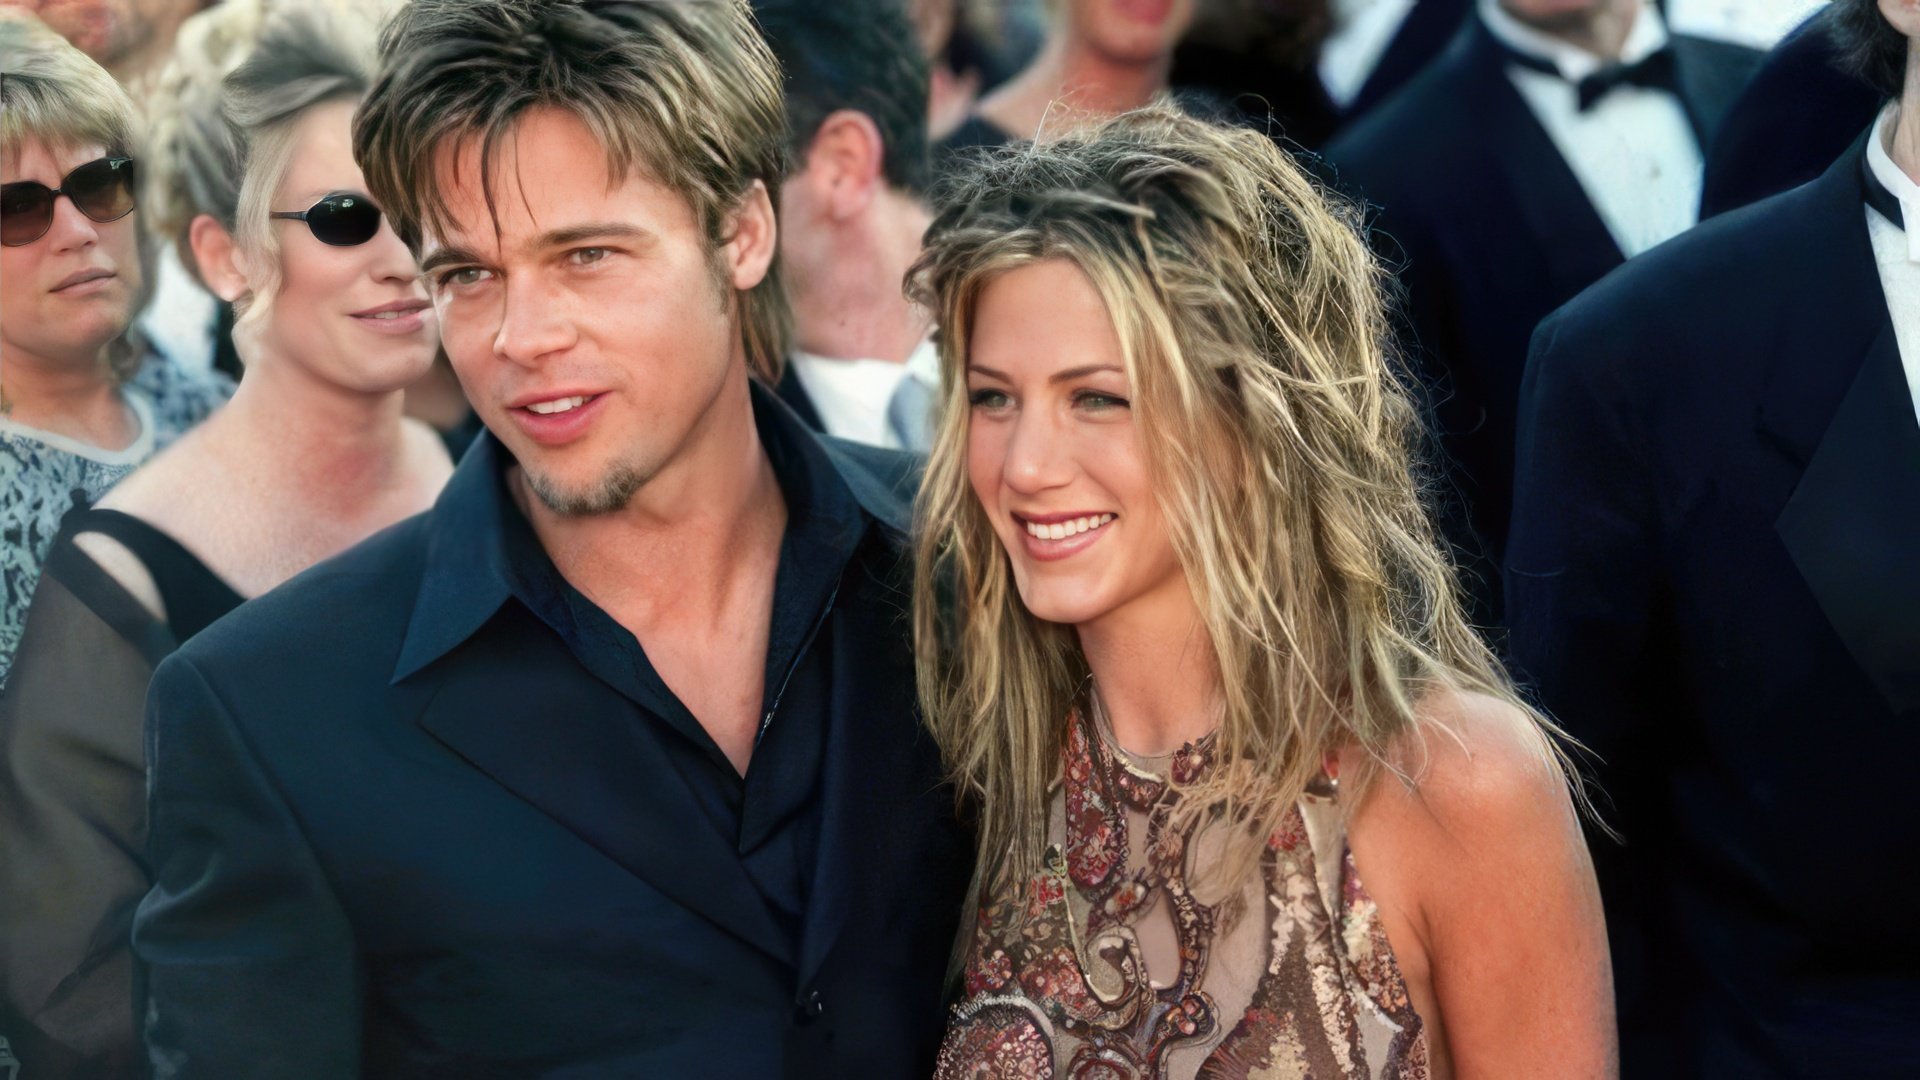 Brad Pitt and Jennifer Aniston were married for 5 years